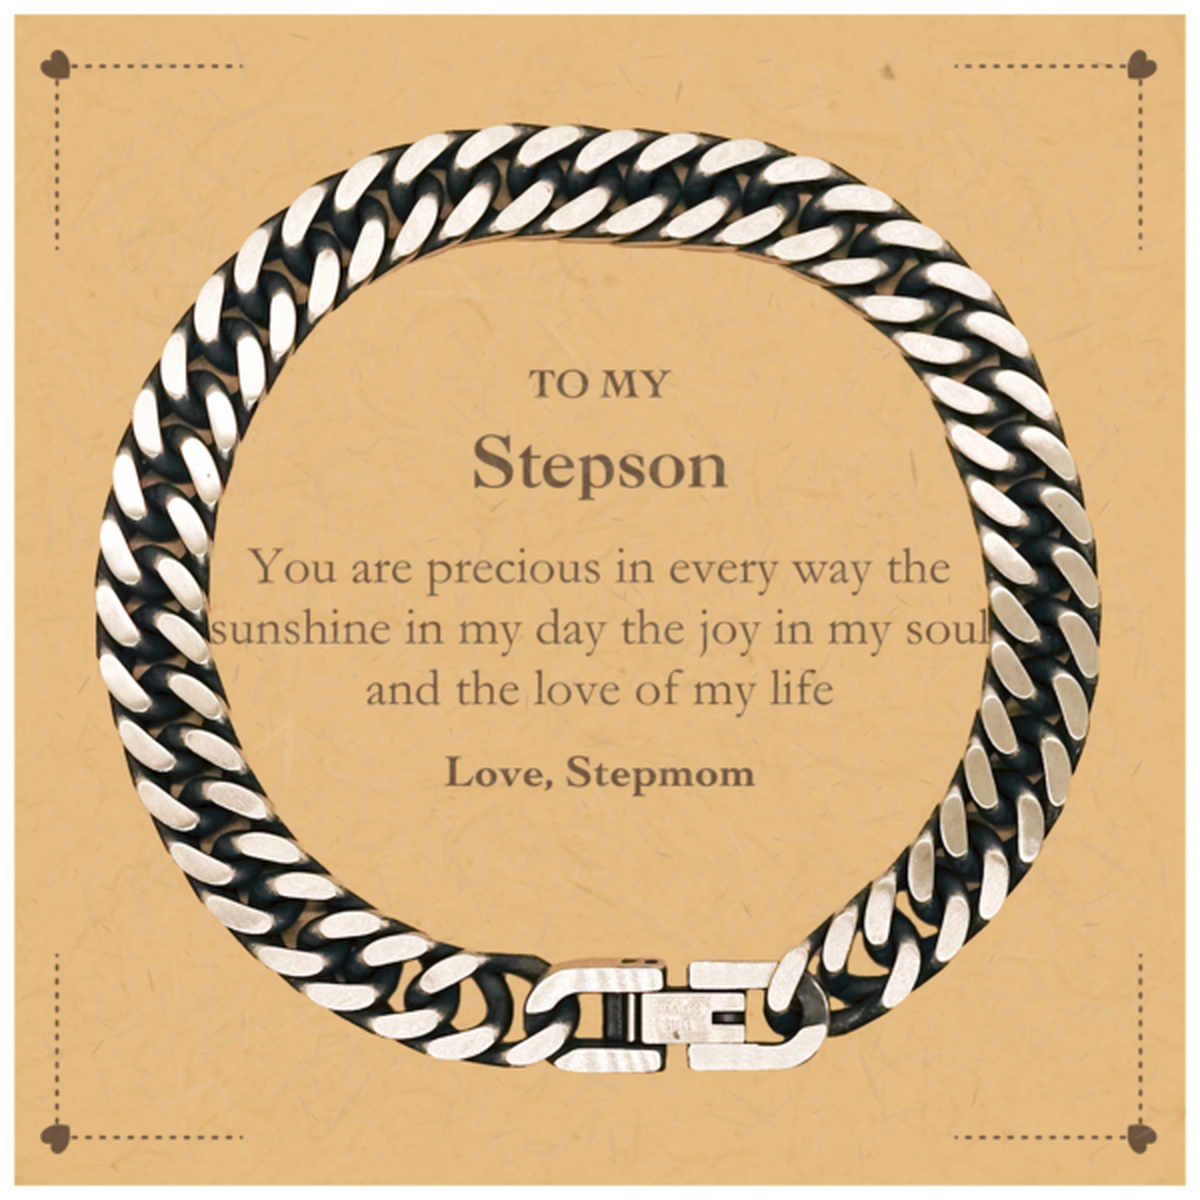 Graduation Gifts for Stepson Cuban Link Chain Bracelet Present from Stepmom, Christmas Stepson Birthday Gifts Stepson You are precious in every way the sunshine in my day. Love, Stepmom